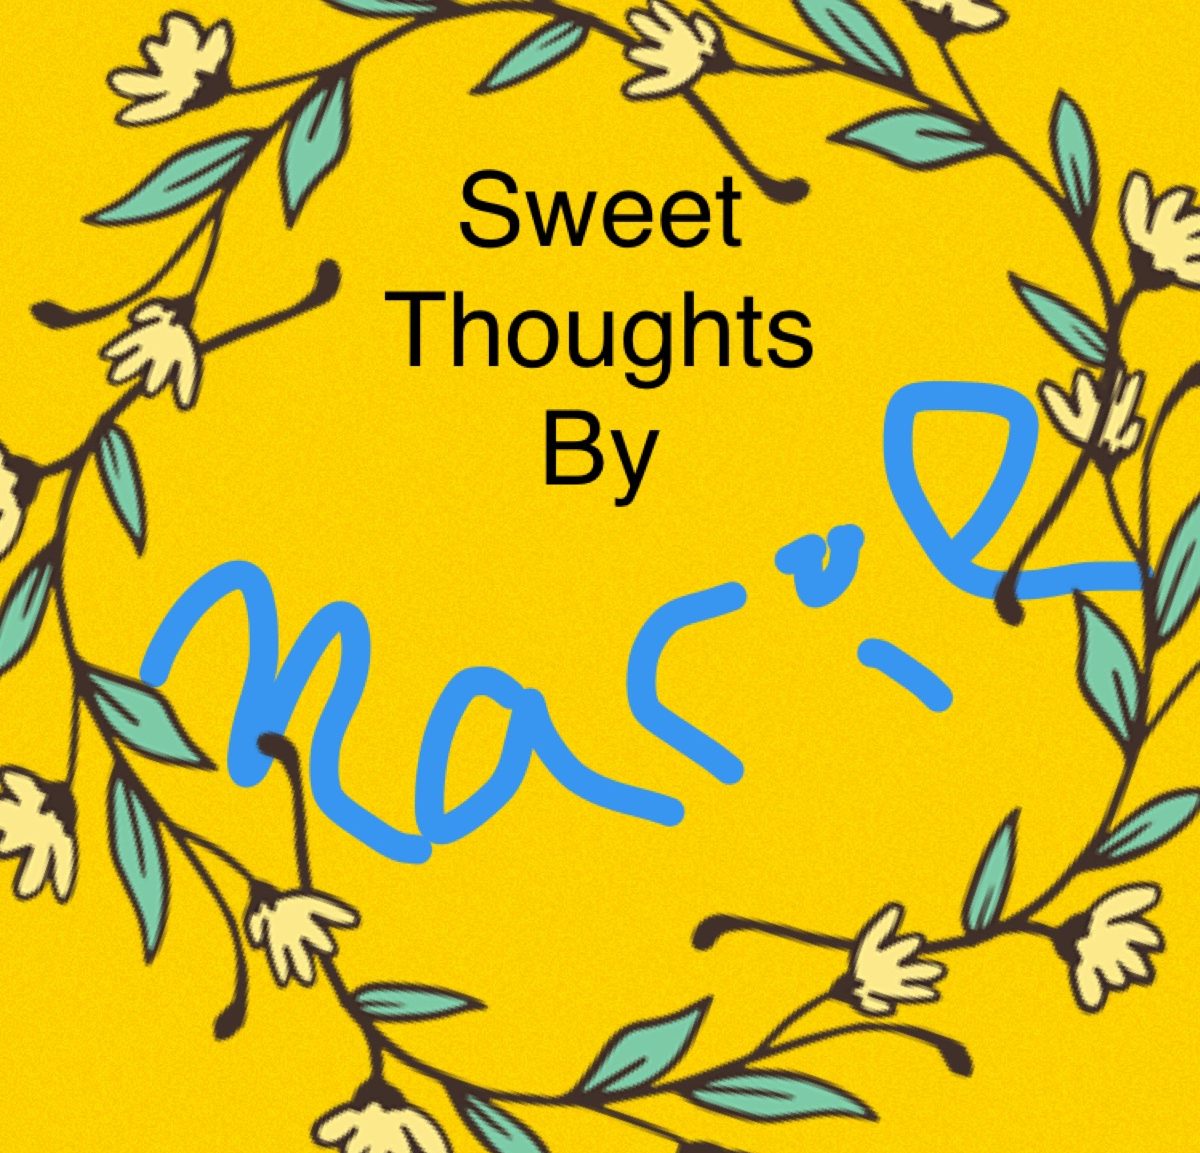 Sweet thoughts by Marie